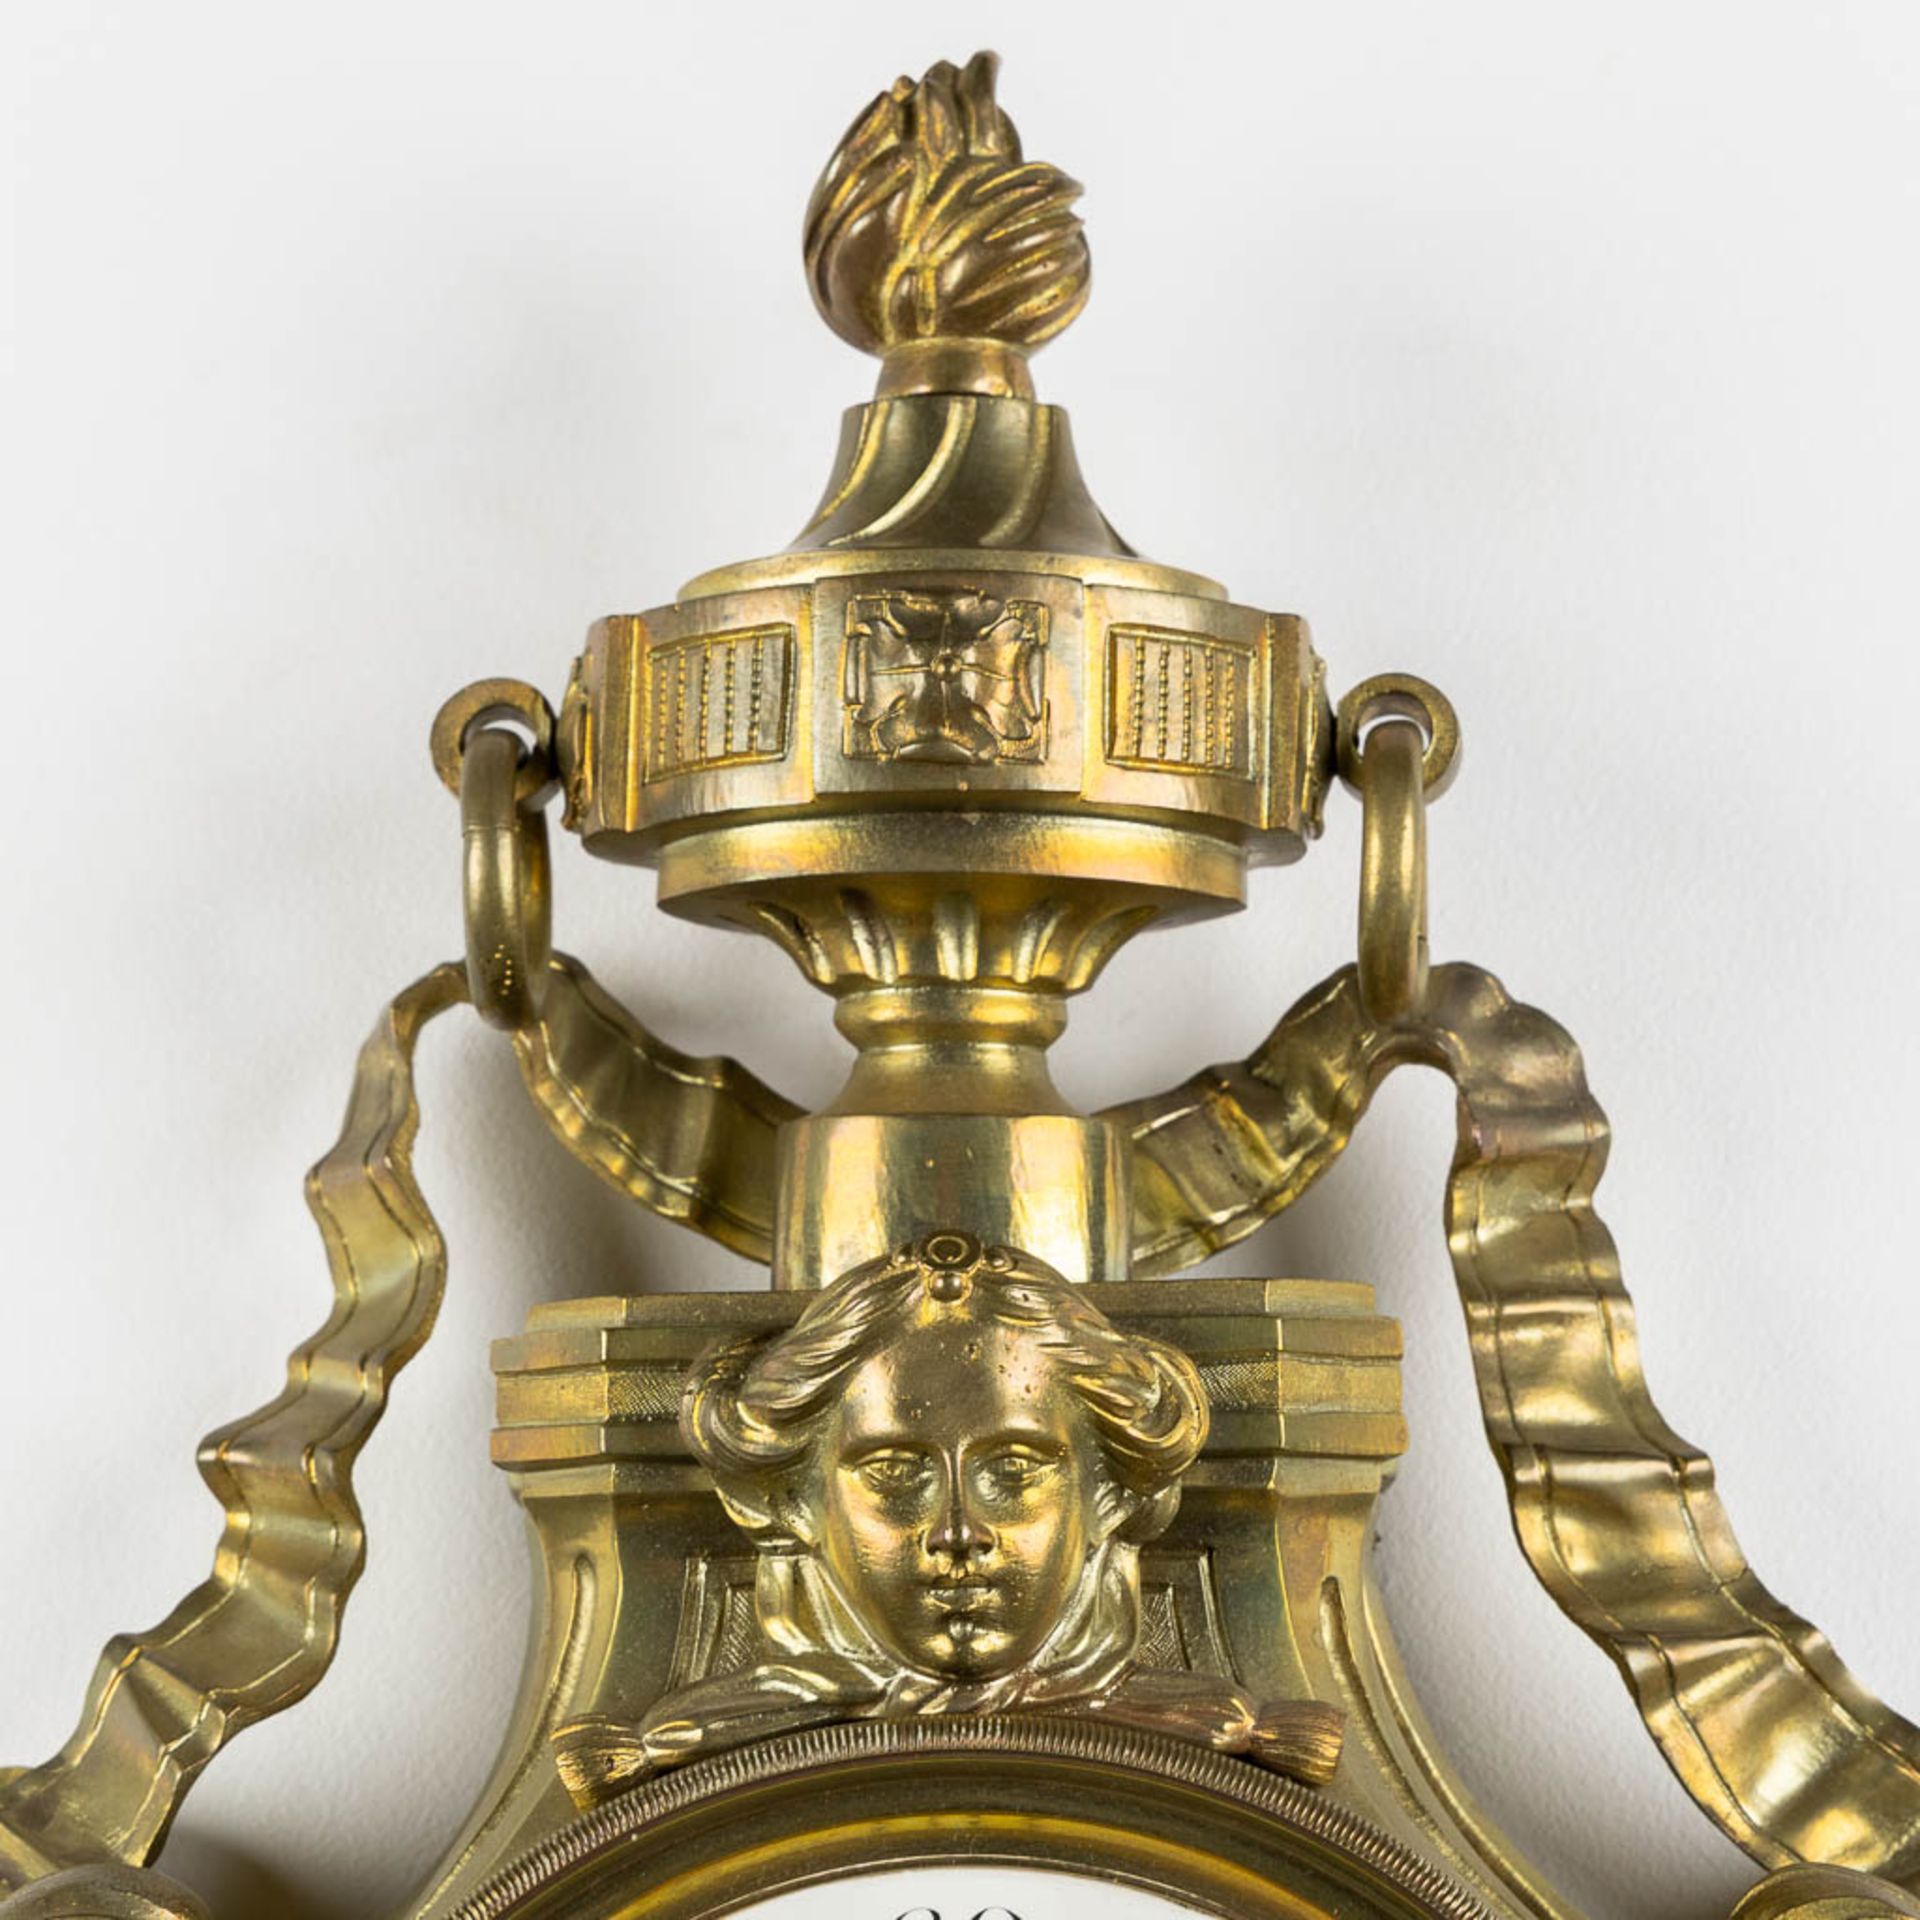 A wall-mounted bronze cartel clock, Louis XVI style. 19th C. (L:12 x W:37 x H:71 cm) - Image 3 of 7